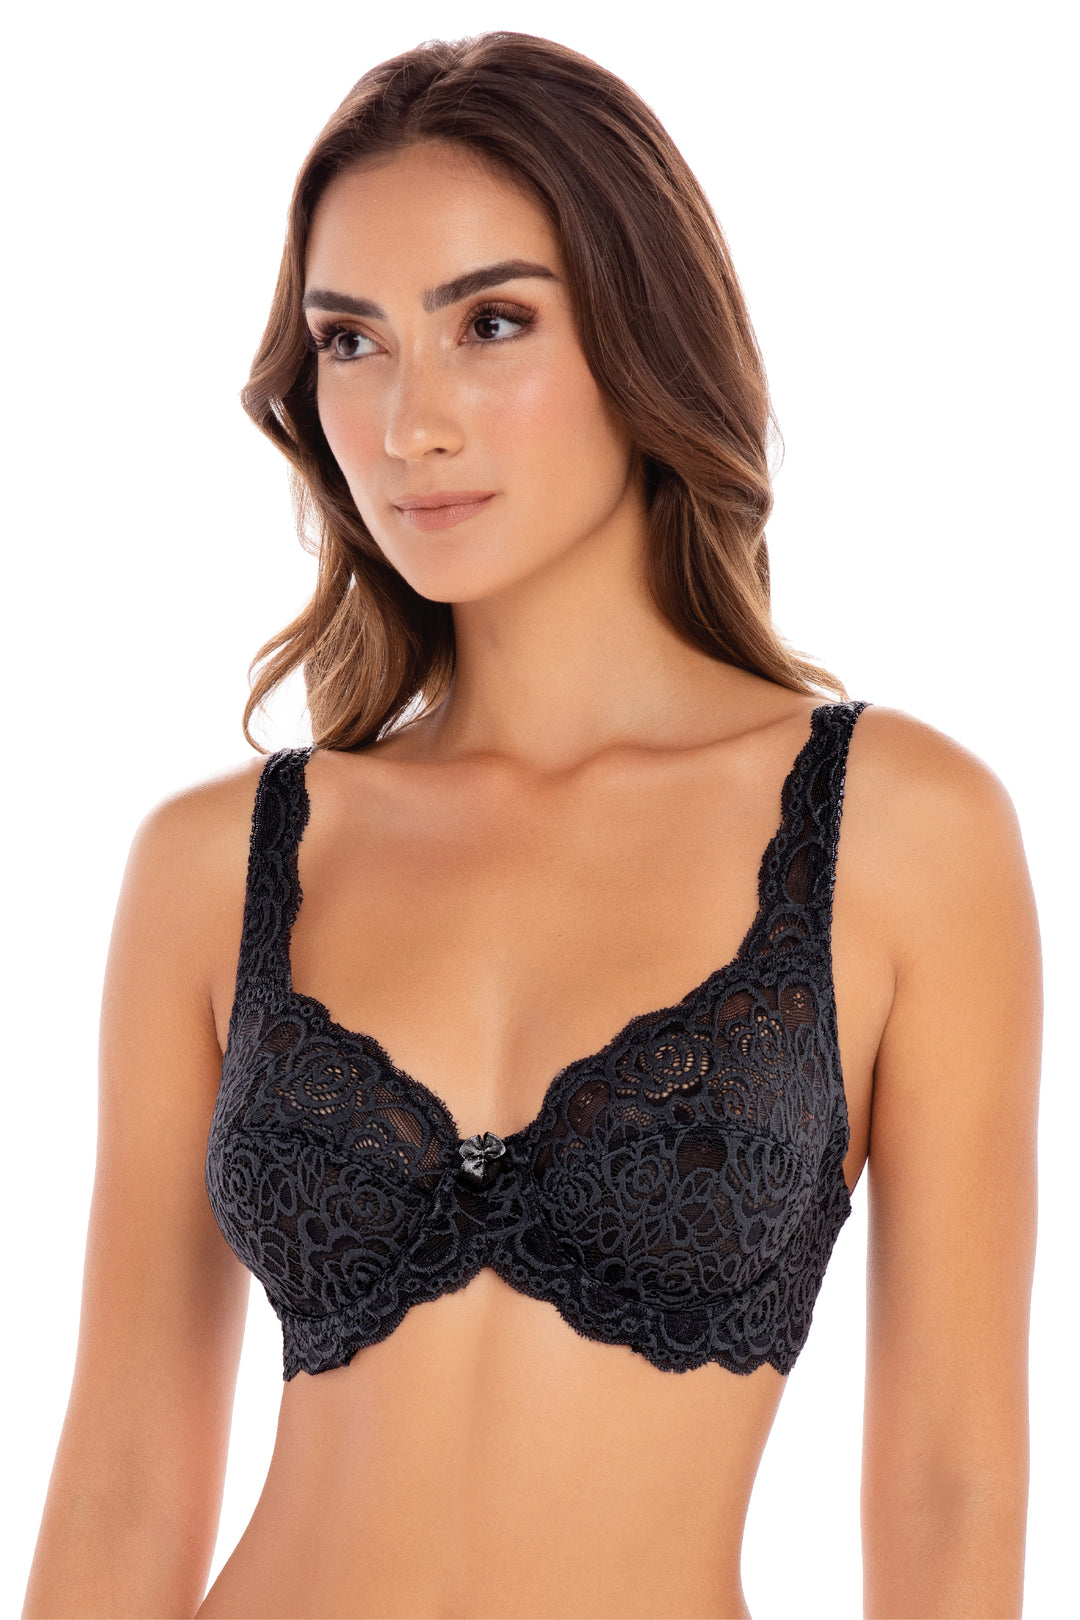 Rene Rofe Bra 36C Black Lace Unlined Underwire Adjustable Clasp Back -  Helia Beer Co